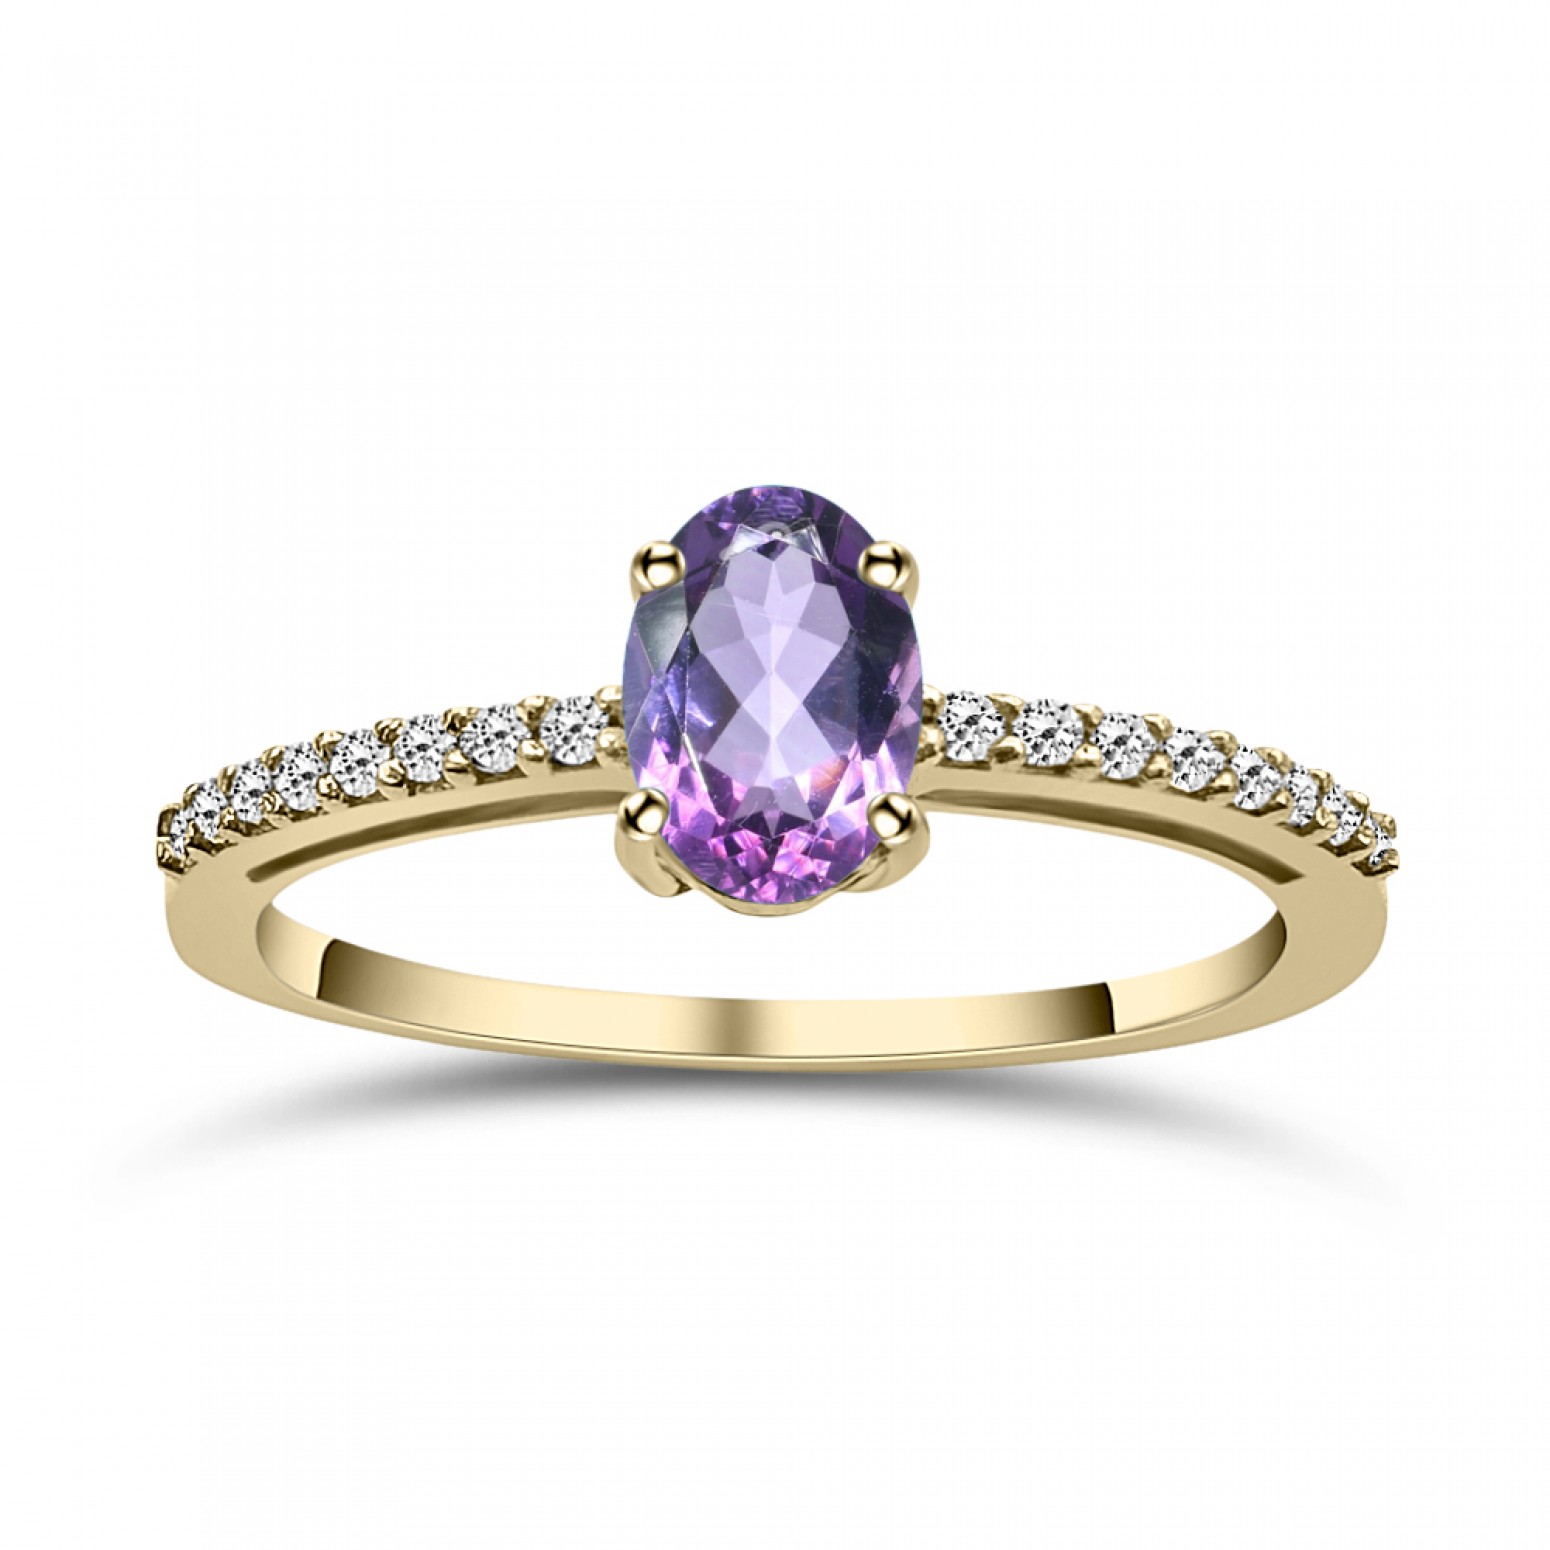 Solitaire ring 14K gold with amethyst and zircon, da4226 RINGS Κοσμηματα - chrilia.gr